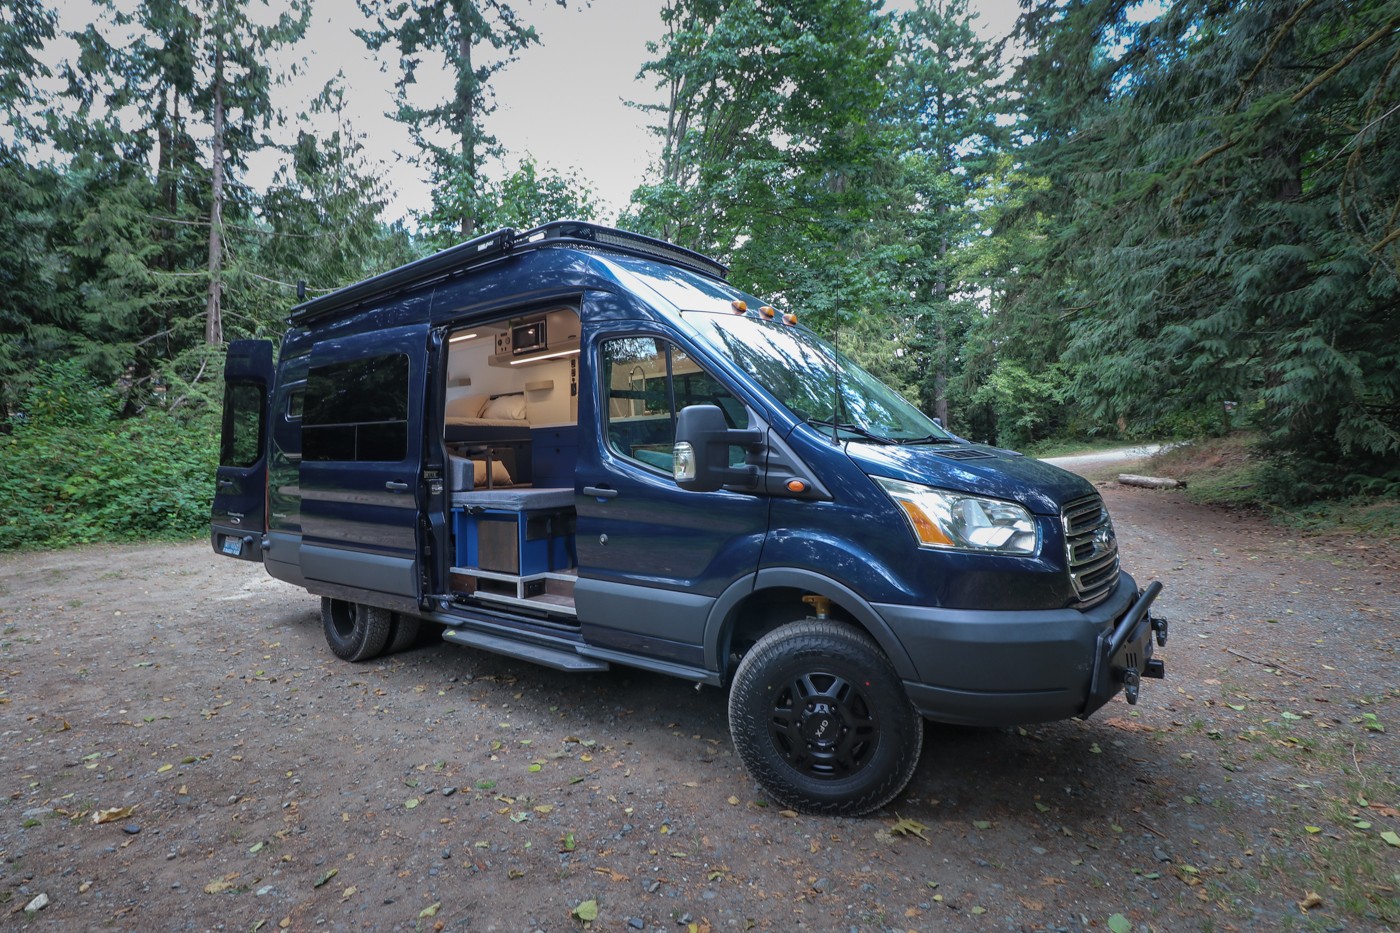 https://s1.cdn.autoevolution.com/images/news/gallery/rental-camper-van-can-shelter-up-to-five-people-even-has-room-for-a-hammock_1.jpg